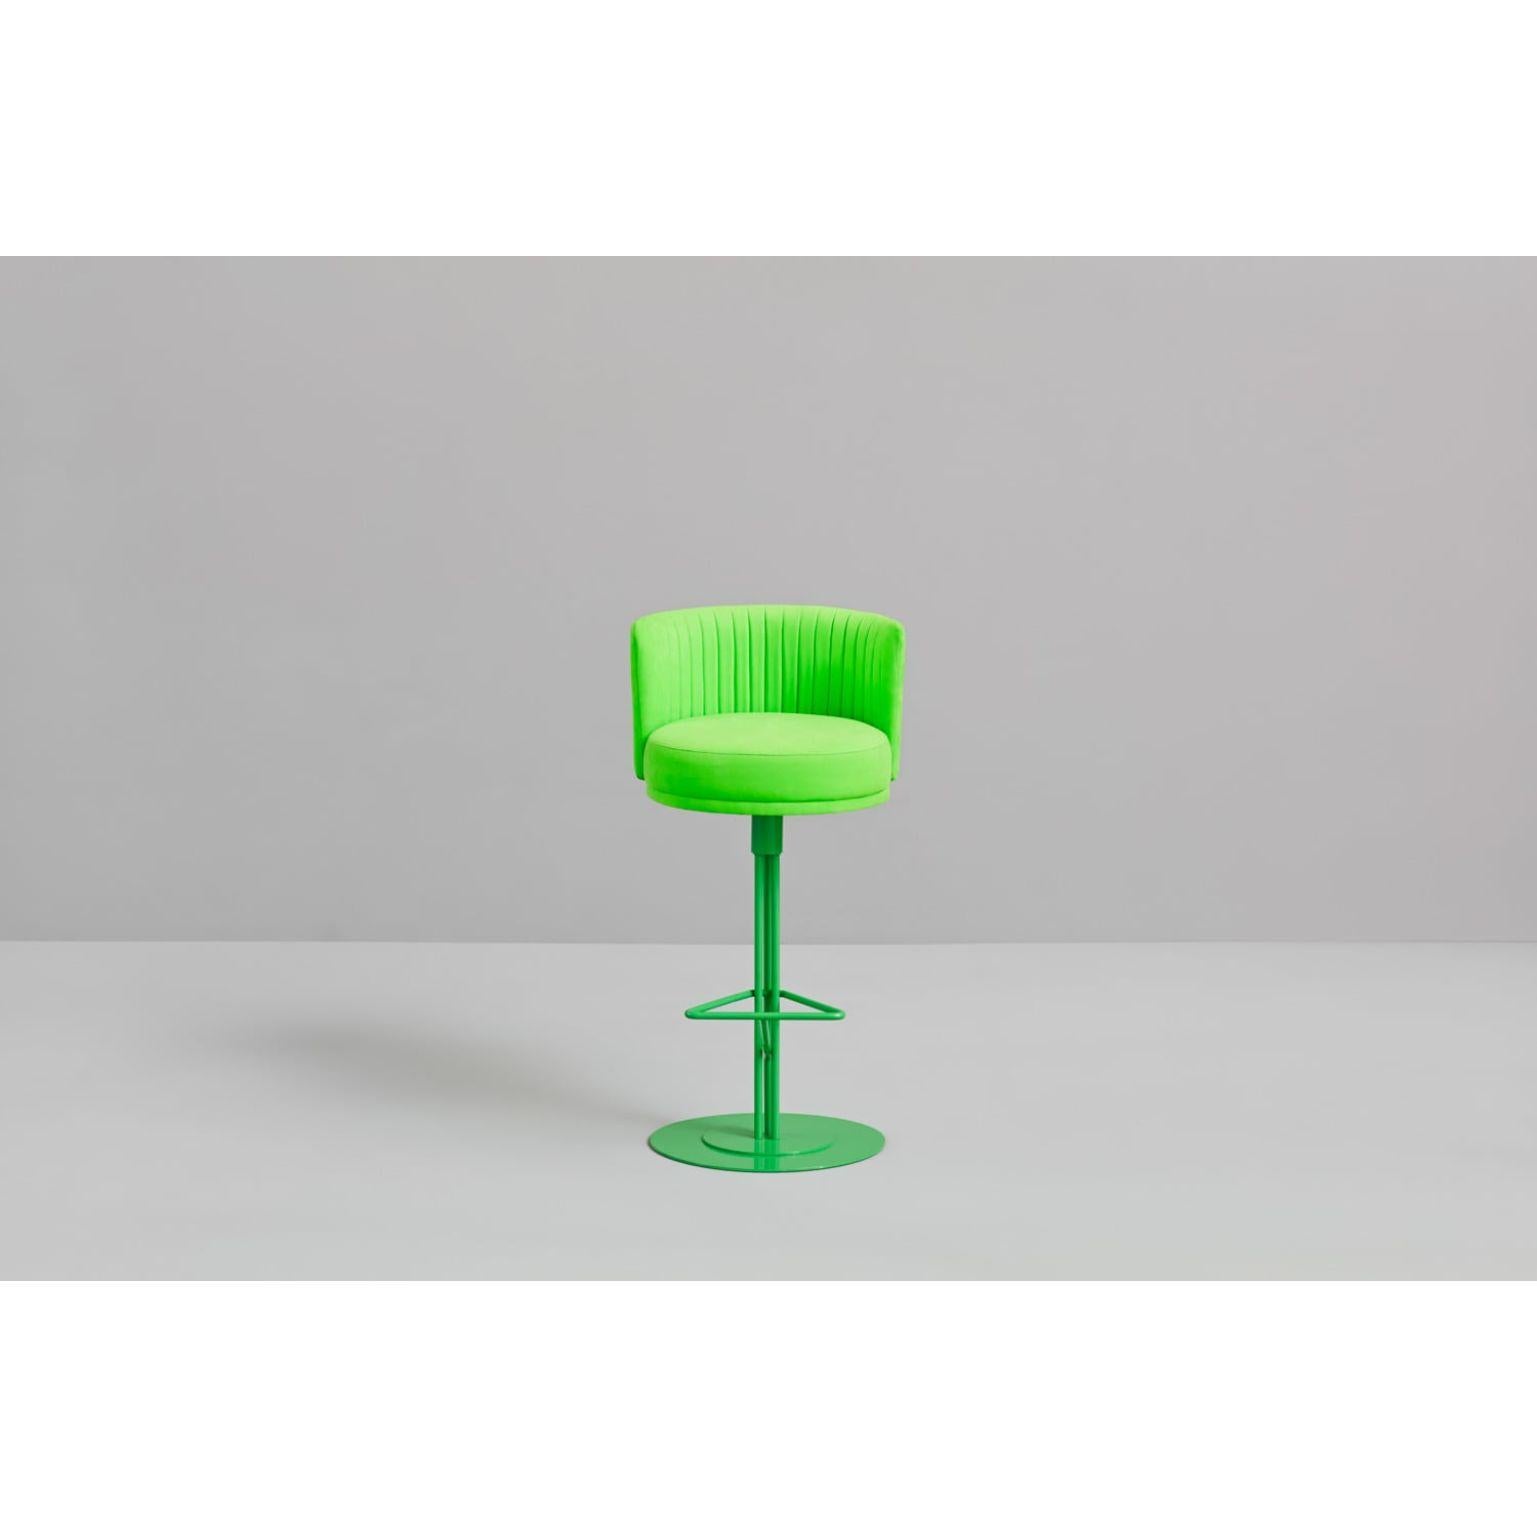 Green Athens stool by Pepe Albargues
Dimensions: W52, D55, H101, Seat 80
Materials: Iron structure and seat particles board
Foam CMHR (high resilience and flame retardant) for all our cushion filling systems
Painted iron structure

Also